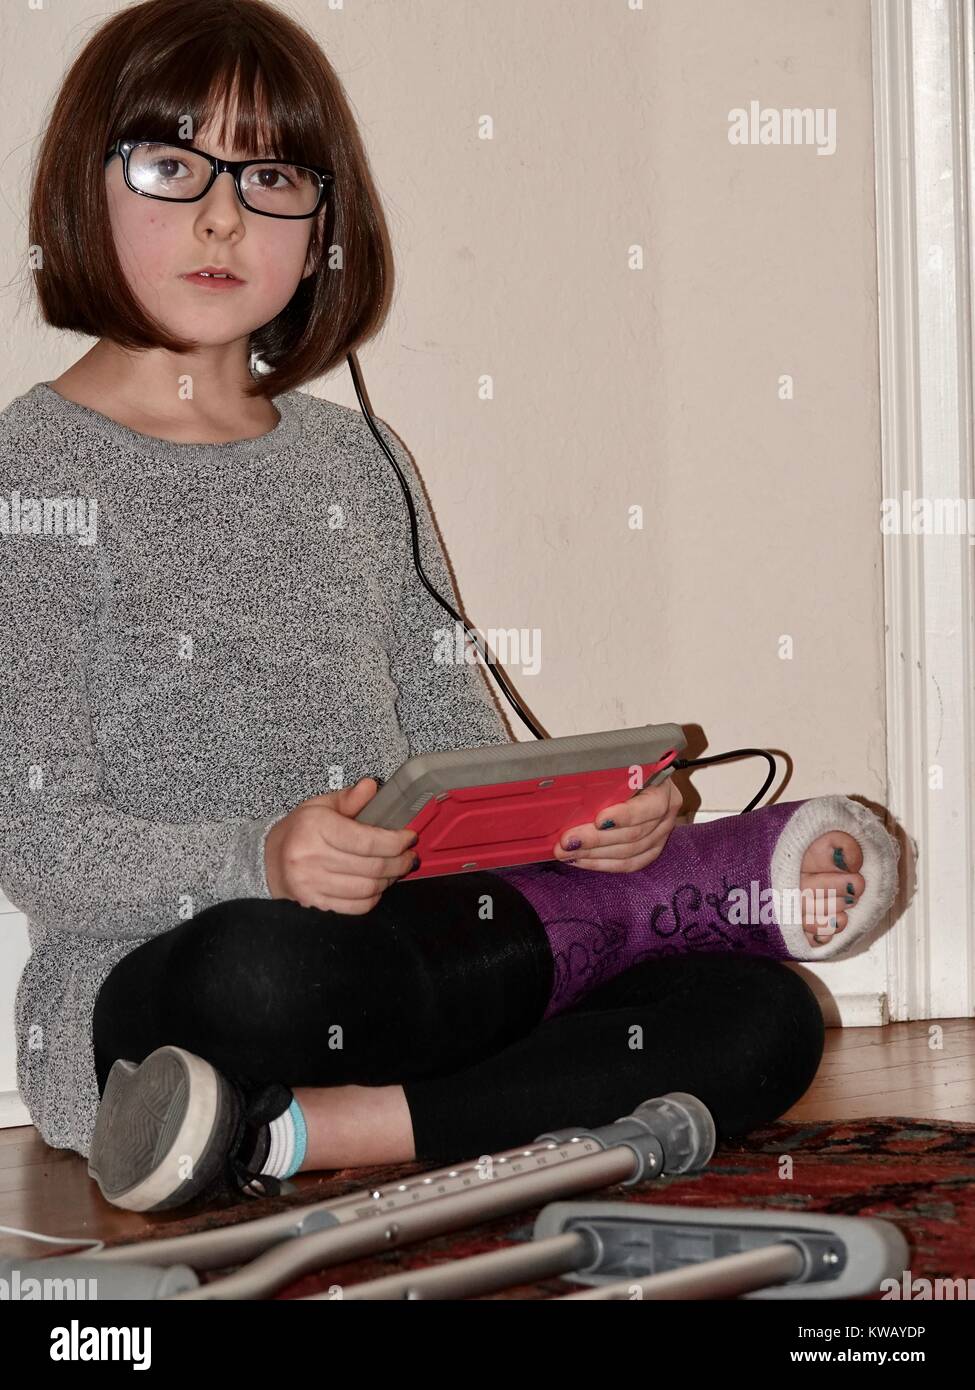 Young girl wearing glasses, with cast on broken foot, sitting cross legged on floor holding electronic tablet. Facing camera with crutches at feet. Stock Photo